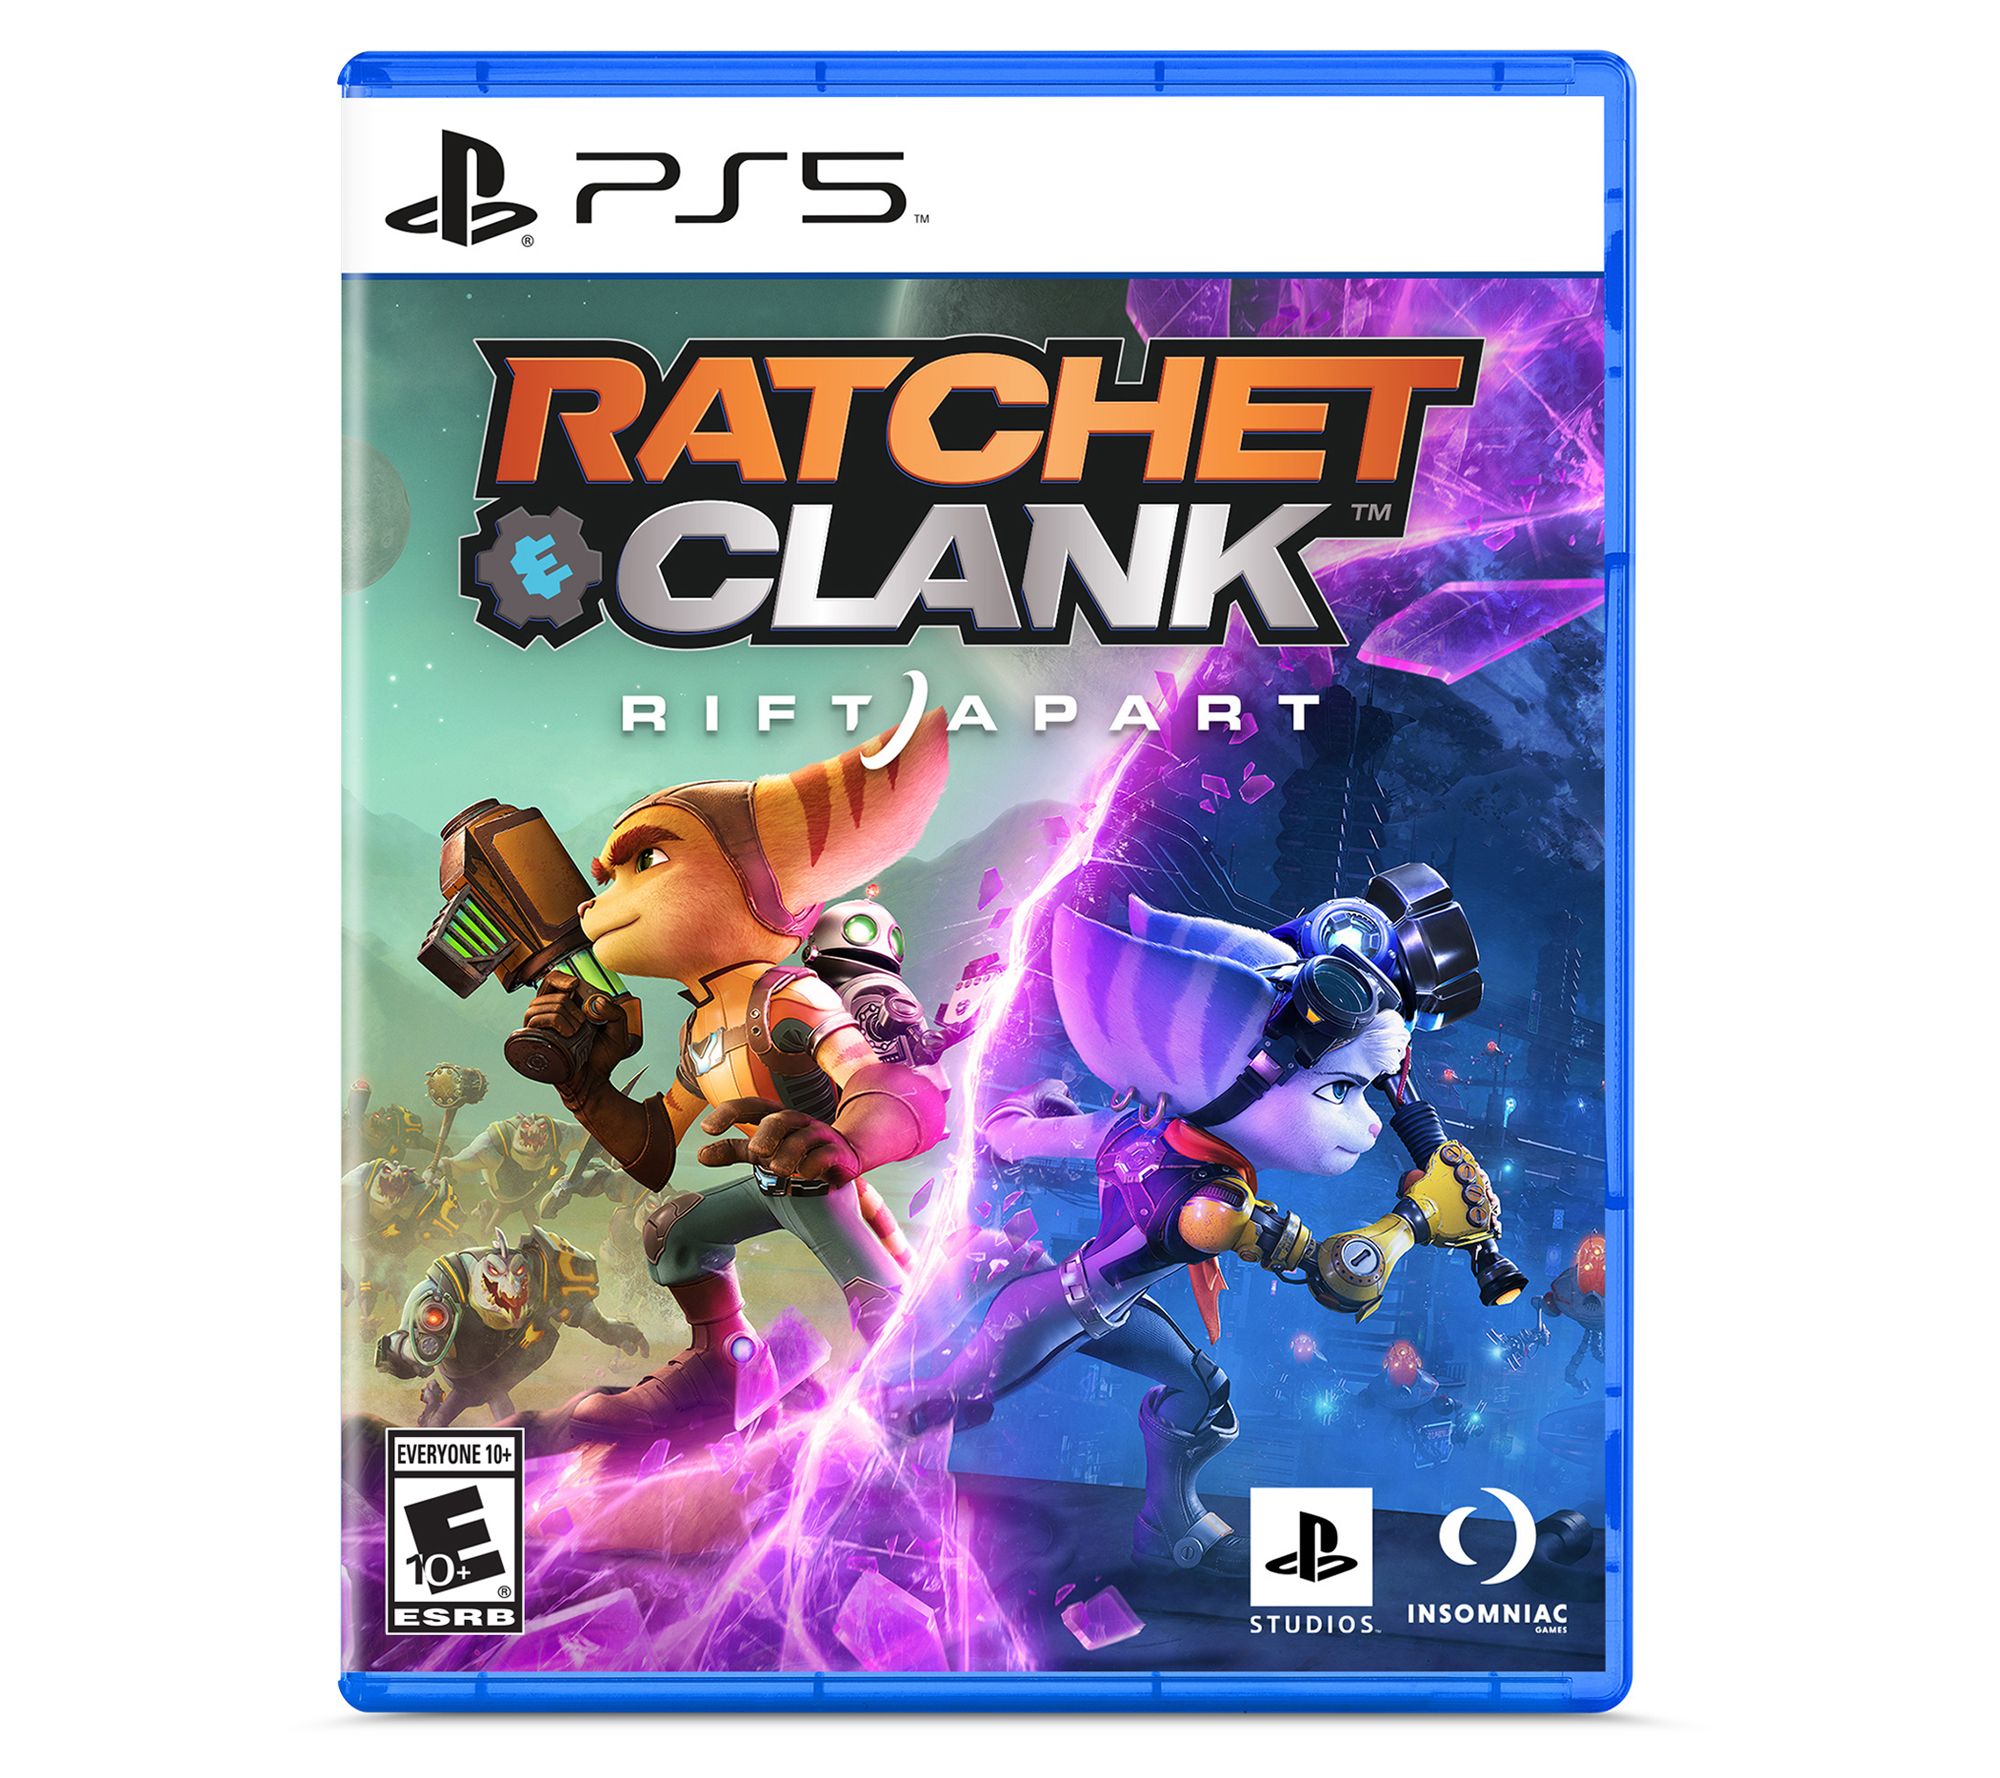 PS3 Ratchet & Clank Game for Kids and Children Buy 1 Or Bundle Up  PlayStation 3